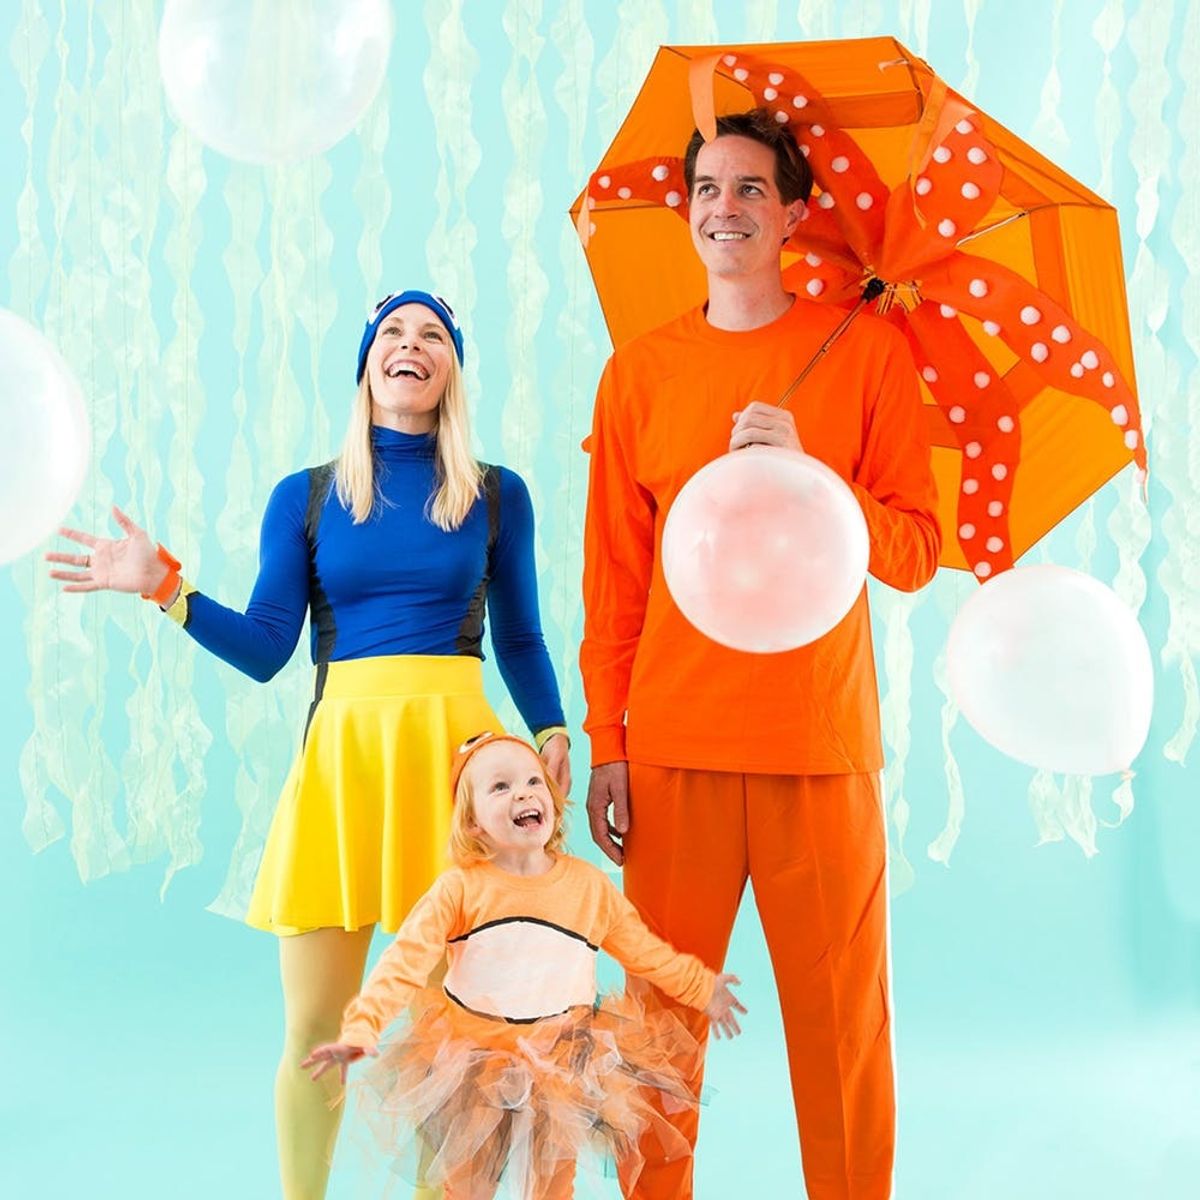 DIY This Finding Dory Family Costume for an Unforgettable Halloween